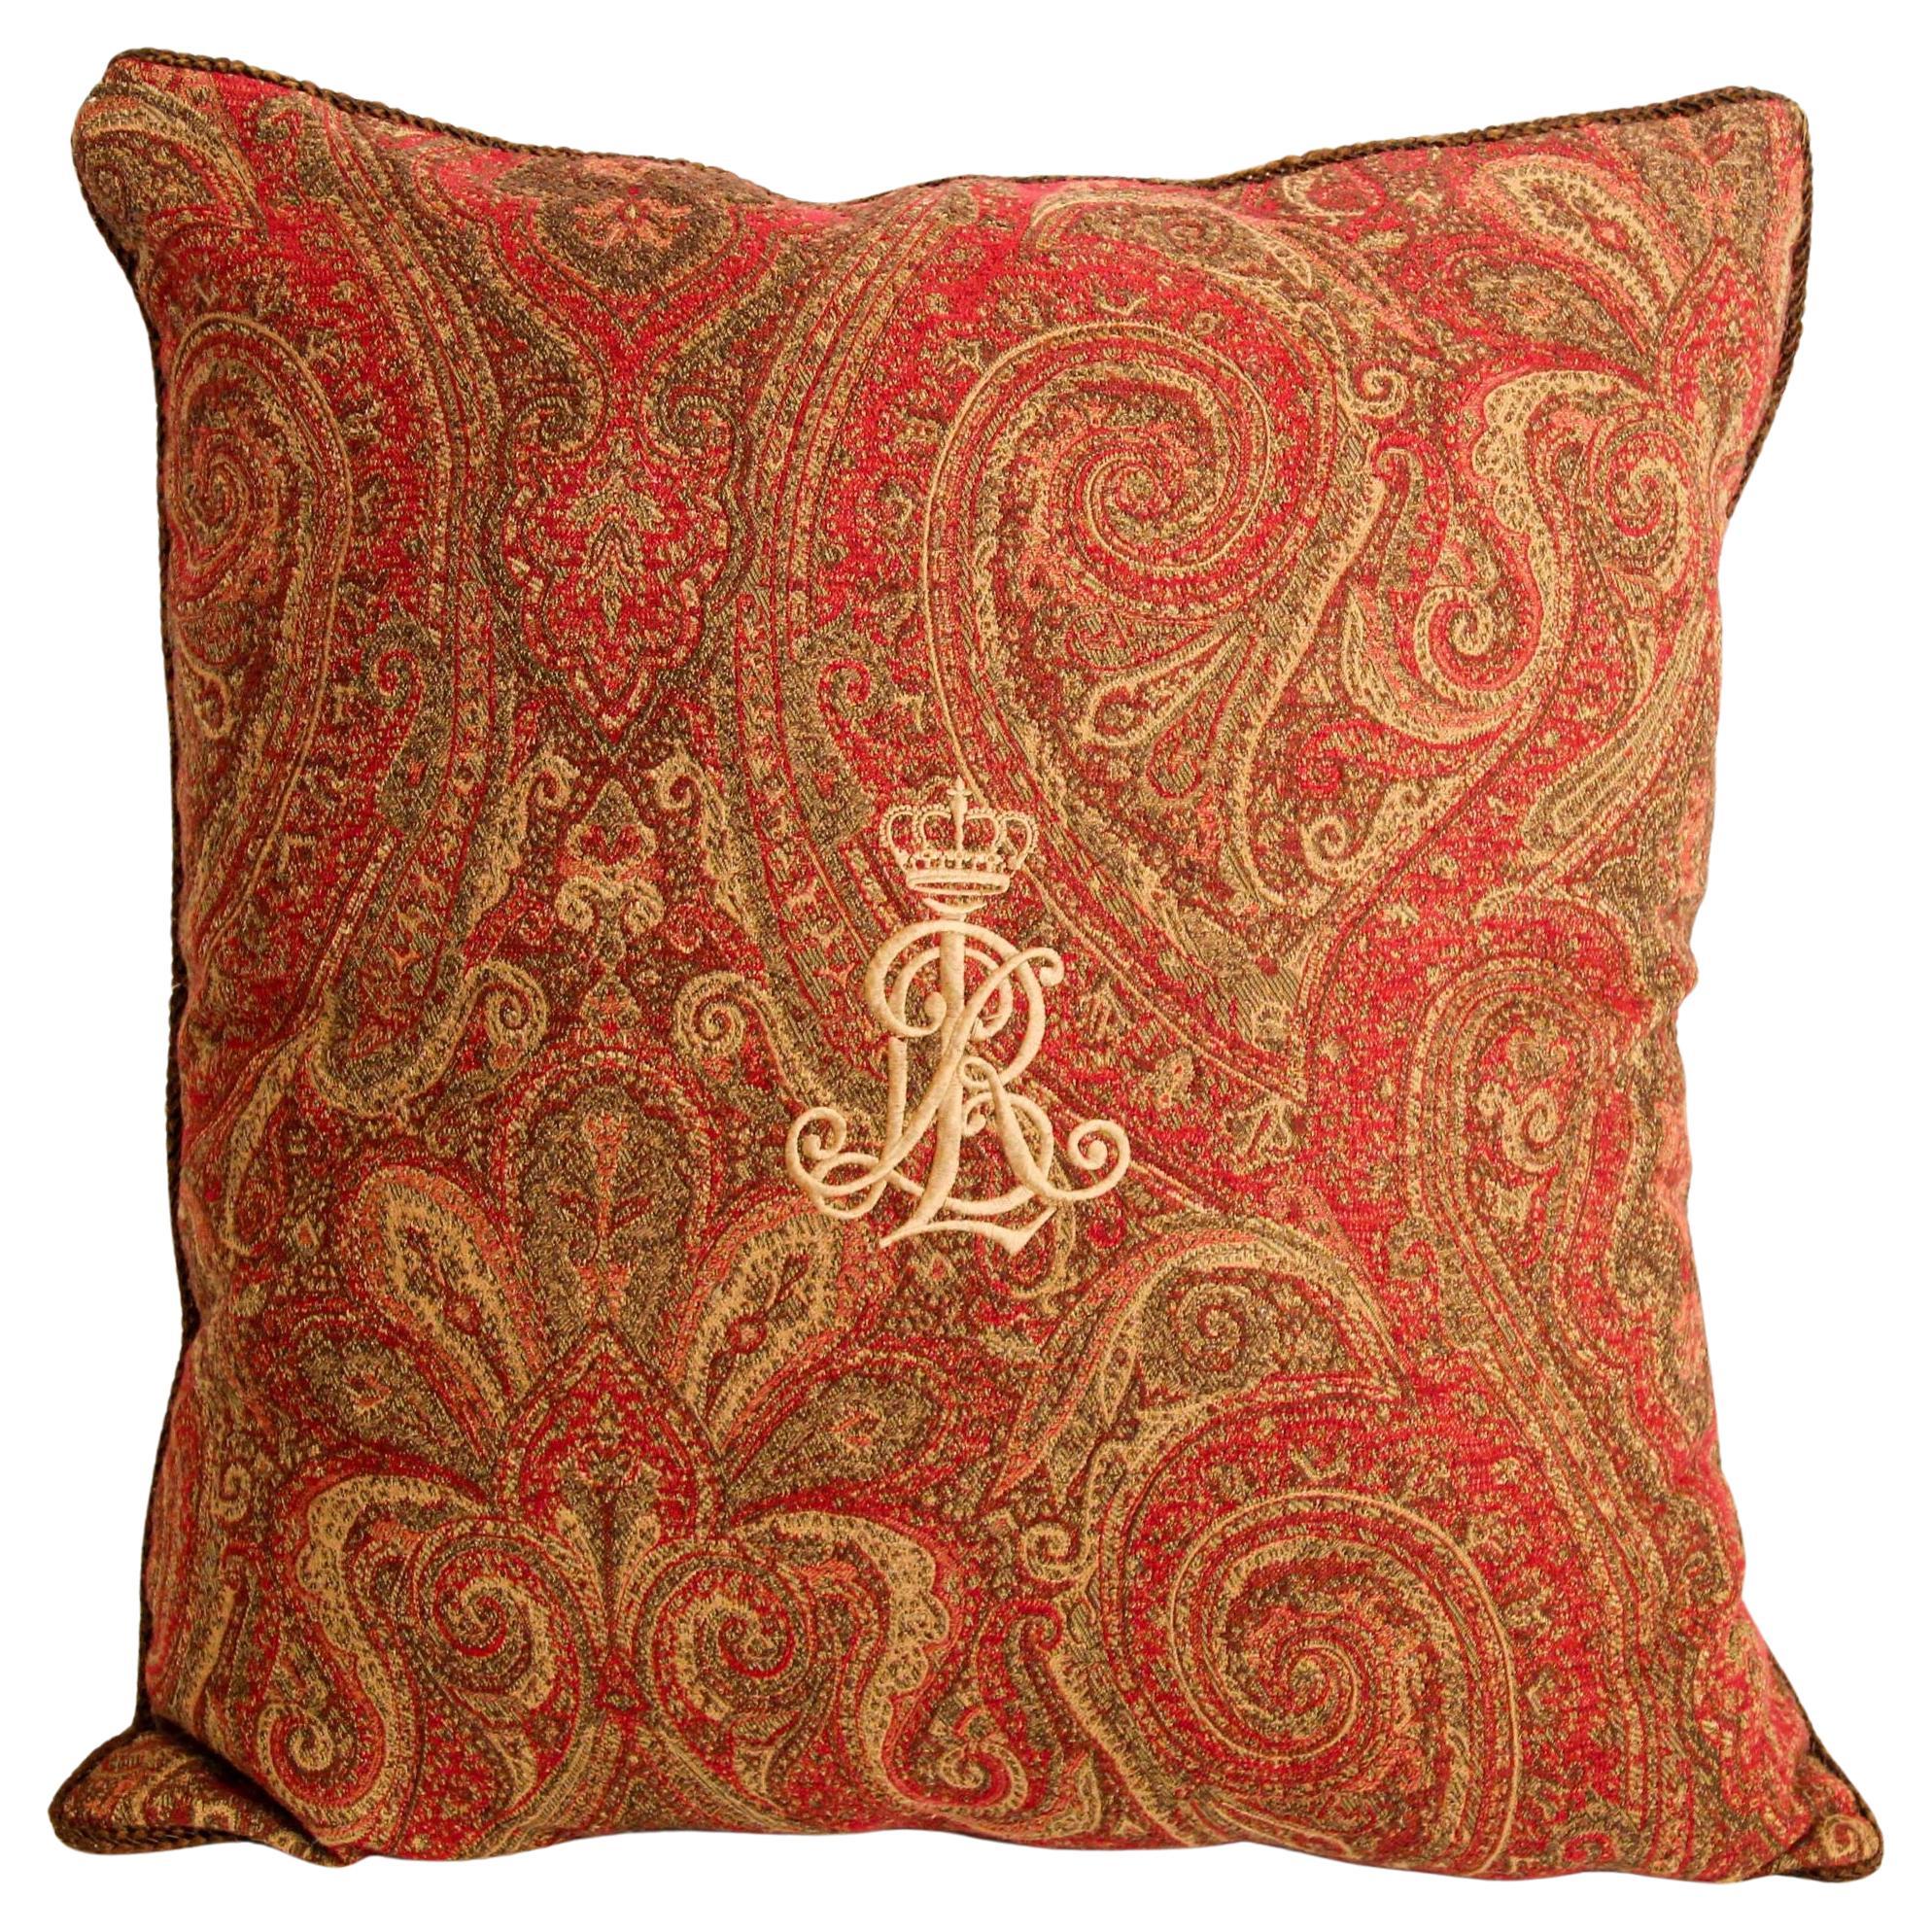 Ralph Lauren Pillow in Red and Gold Paisley RL Crown Logo